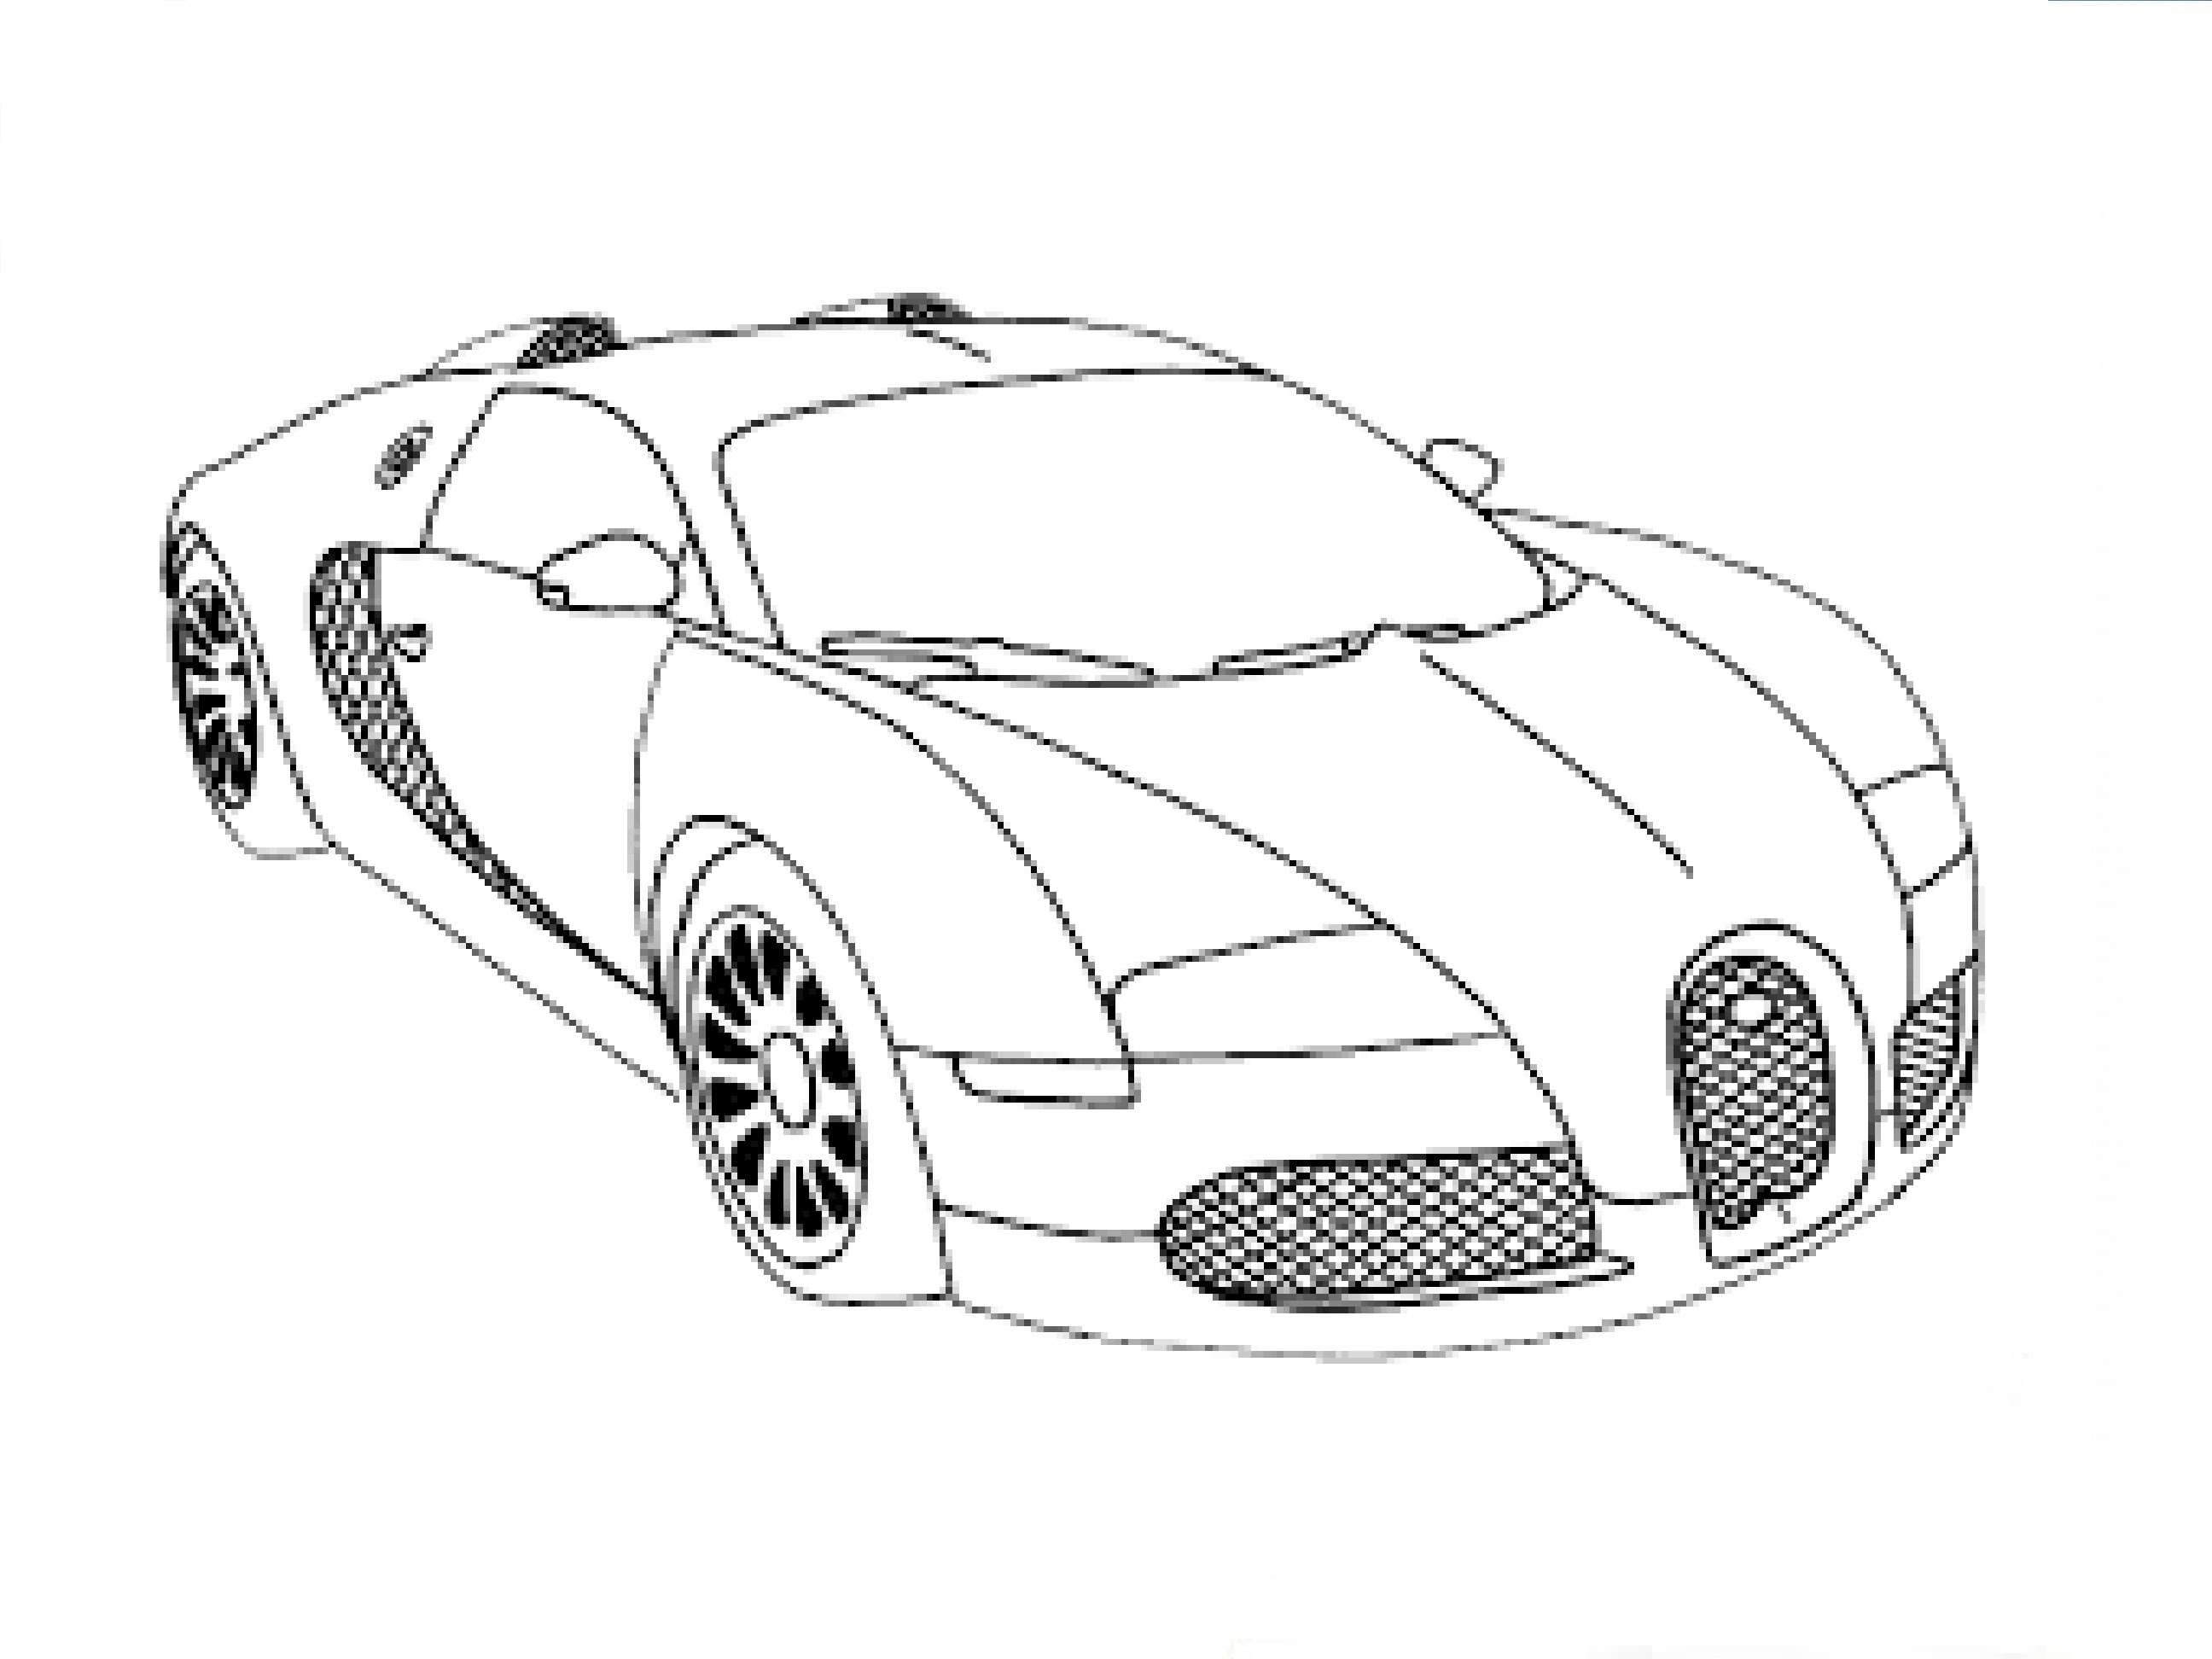 Bugatti paintings search result at PaintingValley.com